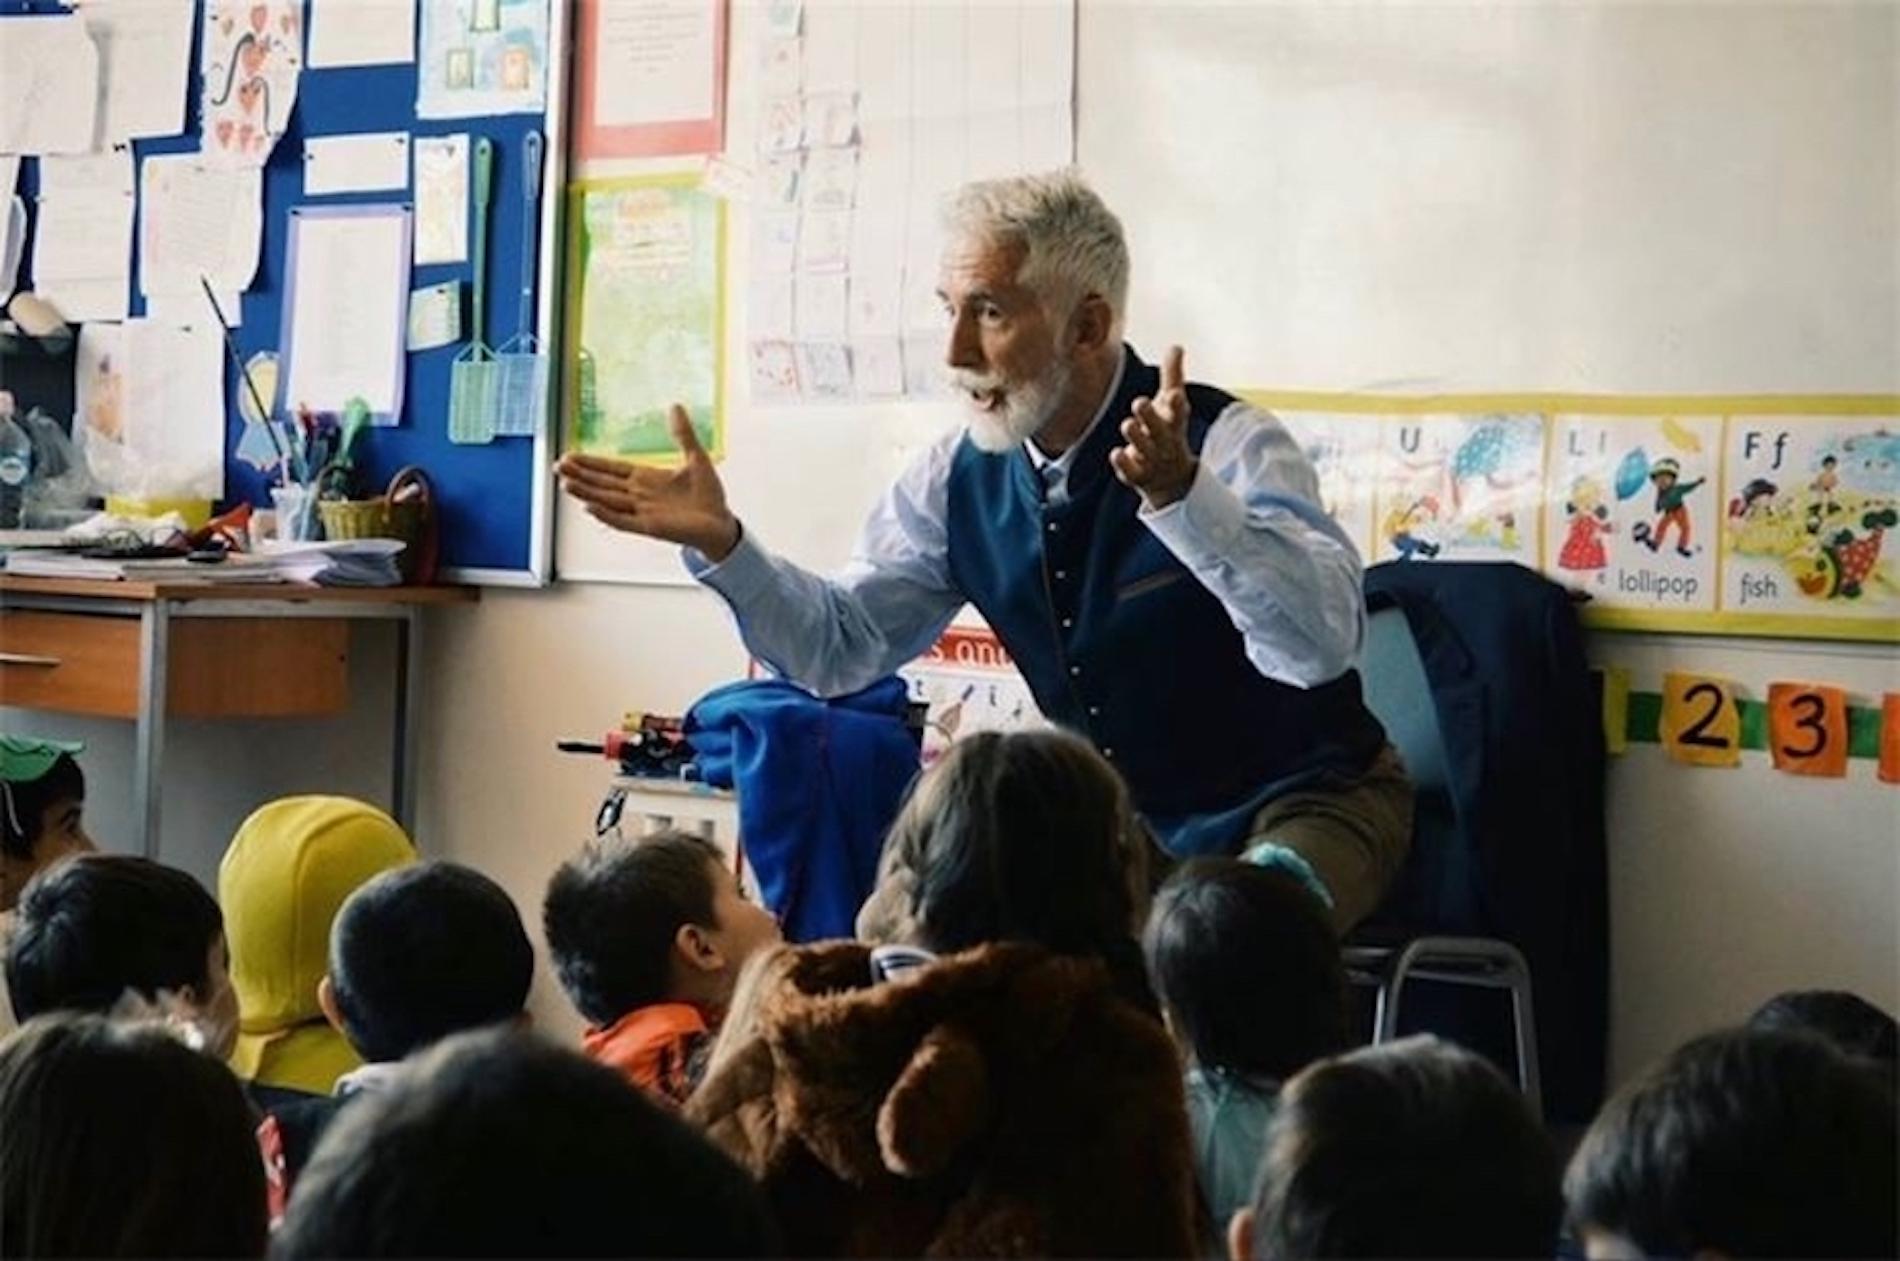 Sef Townsend, a man with white hair and beard tells stories to a group of young people sitting on the floor